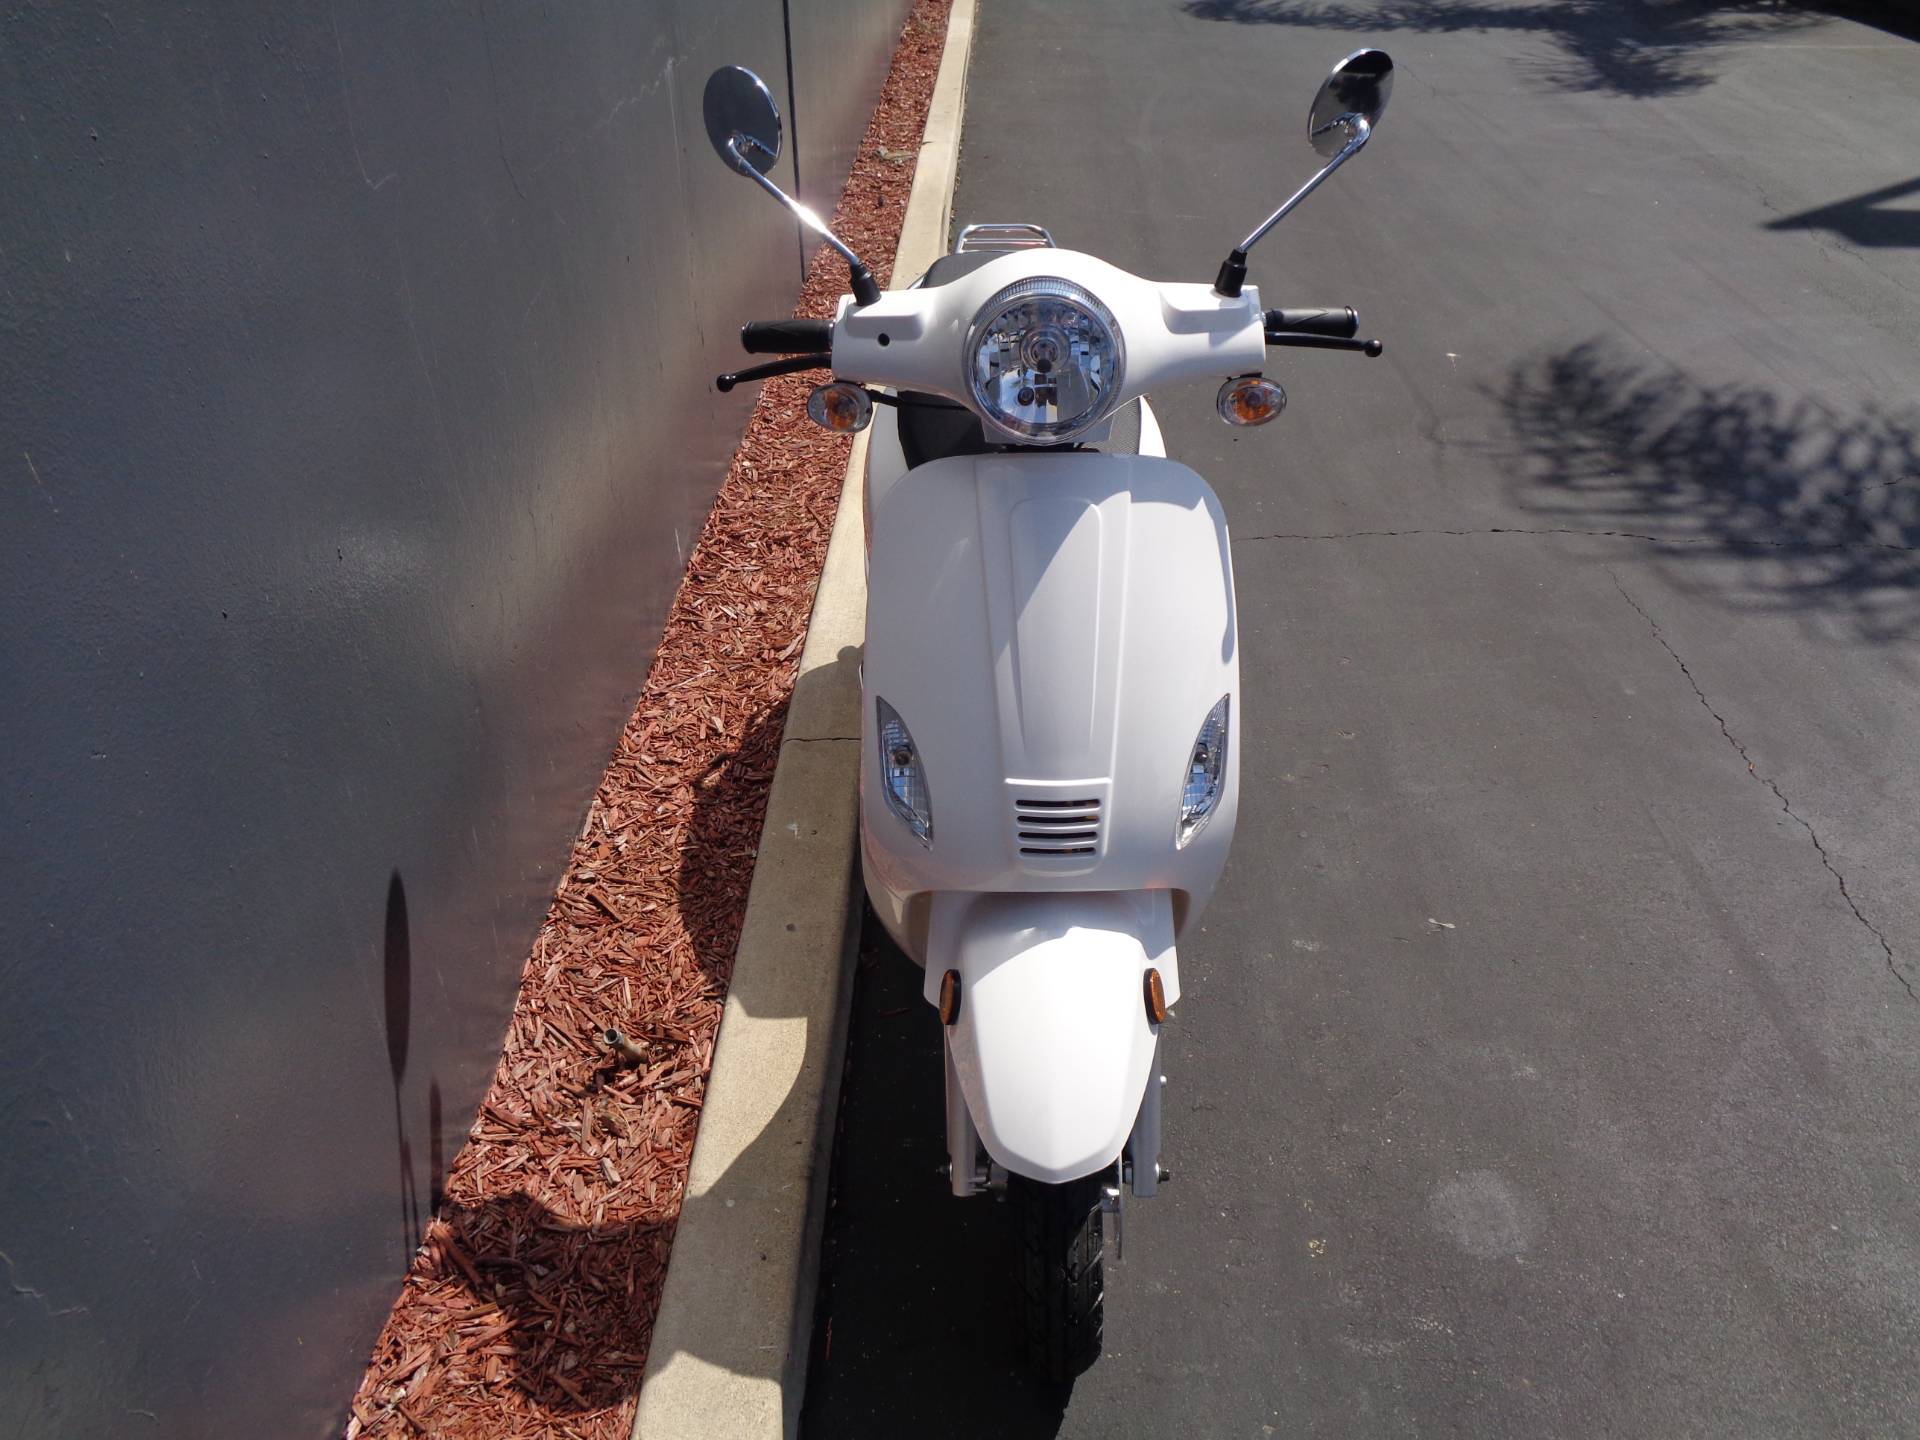 2019 Wolf Brand Scooters Wolf Lucky II in Chula Vista, California - Photo 17